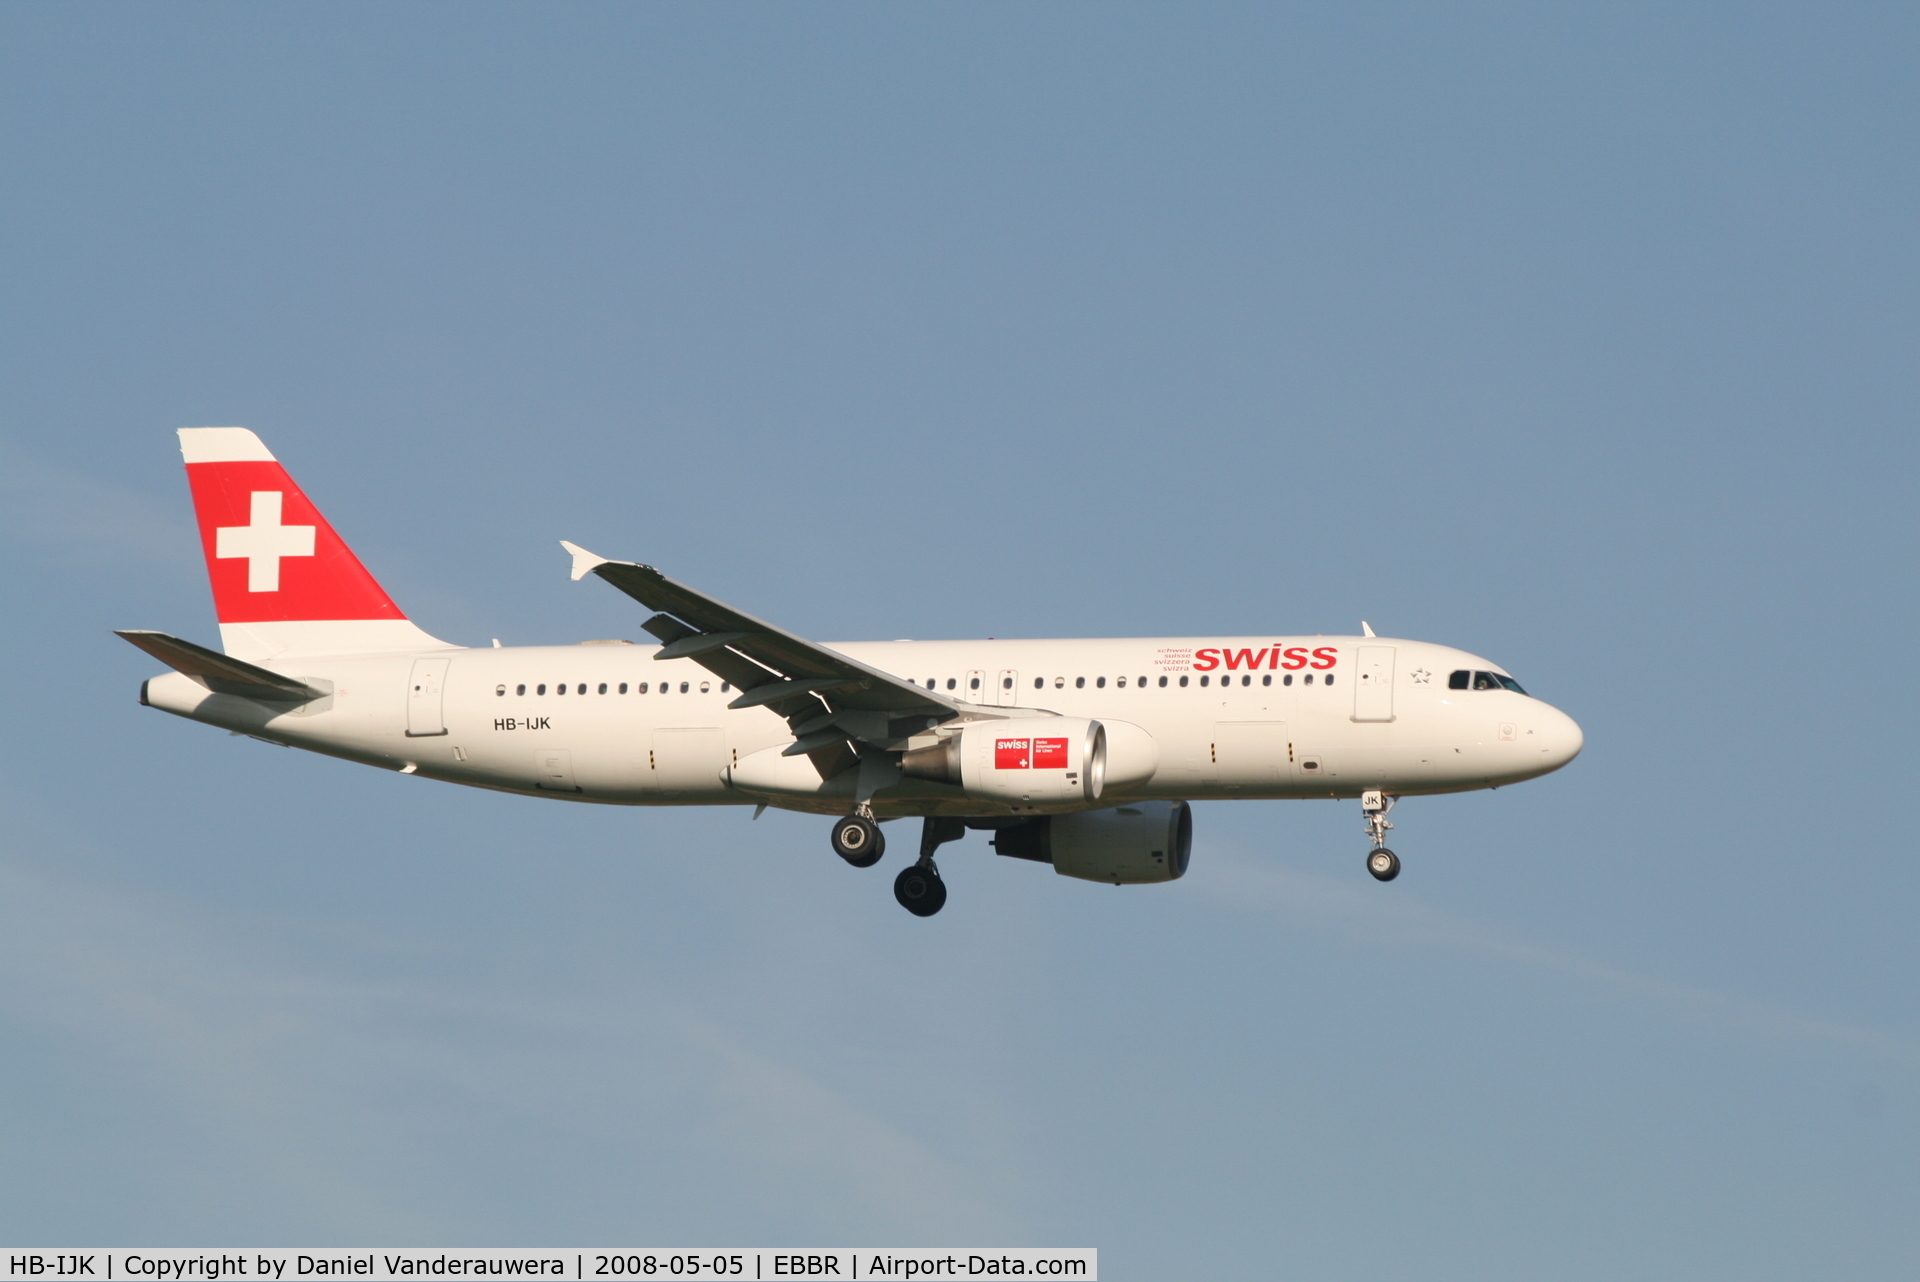 HB-IJK, 1996 Airbus A320-214 C/N 596, arrival of flight LX786 to rwy 02